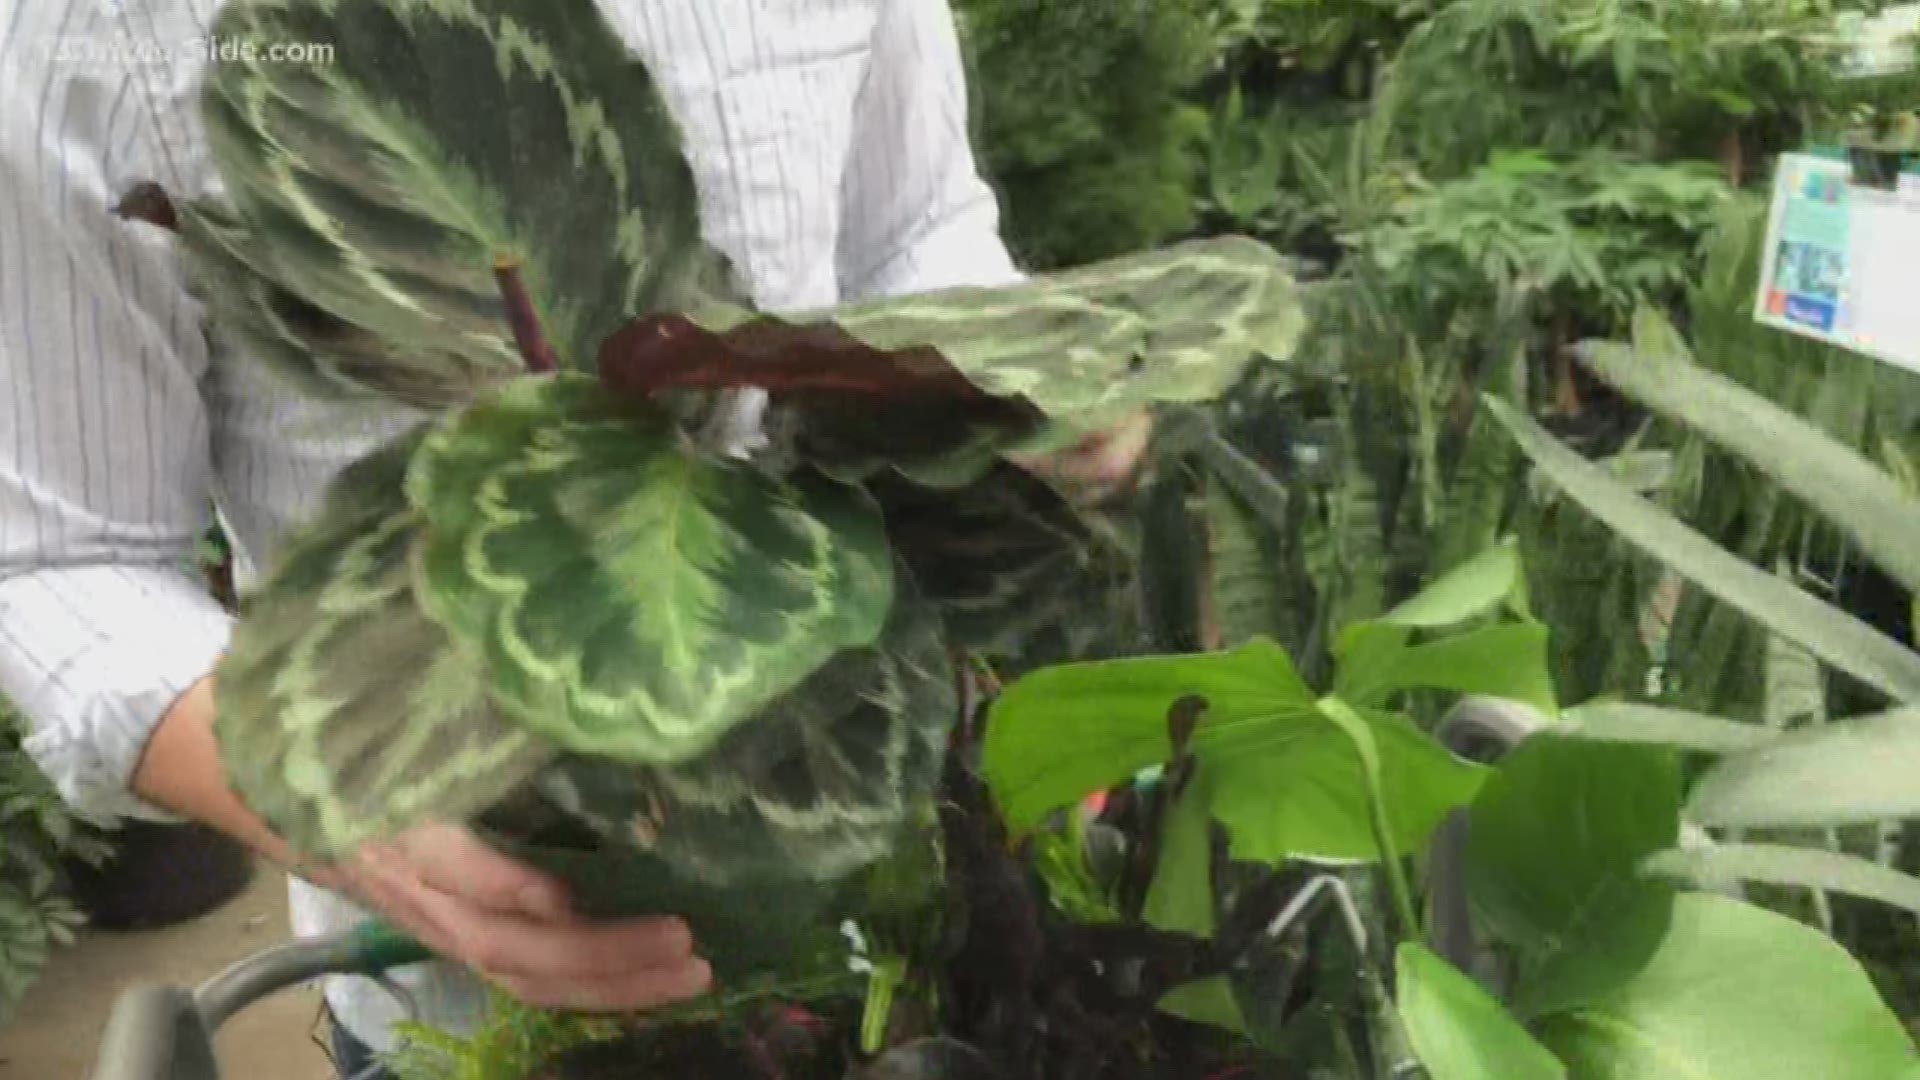 This week, our Greenthumb Expert is helping Steve Zaagman shop for a new plant.